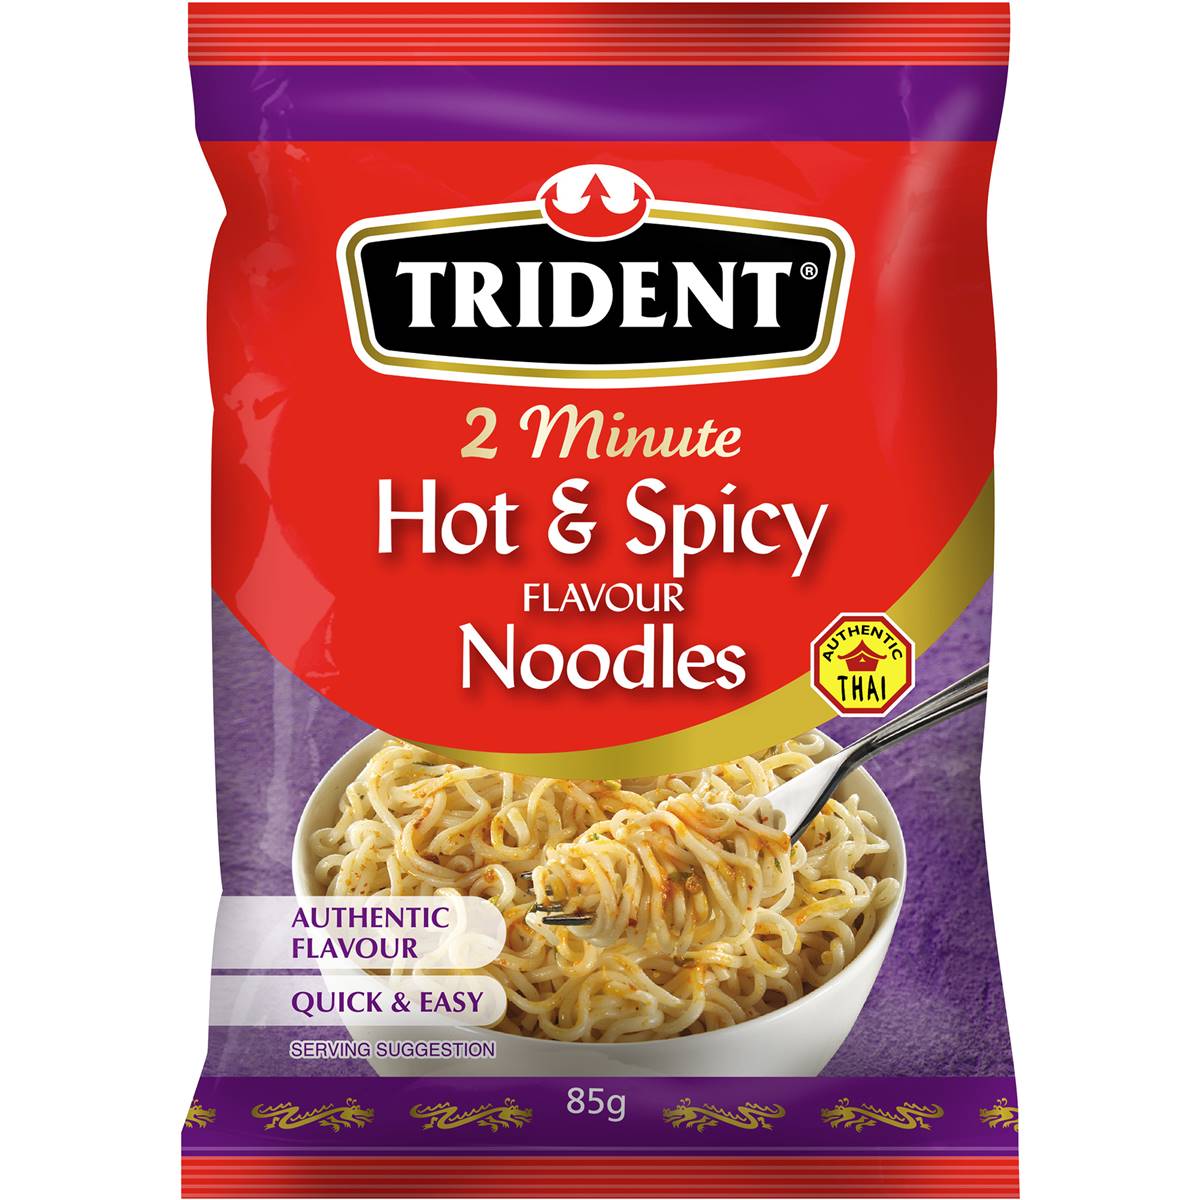 Calories in Trident Hot & Spicy 2 Minute Noodles